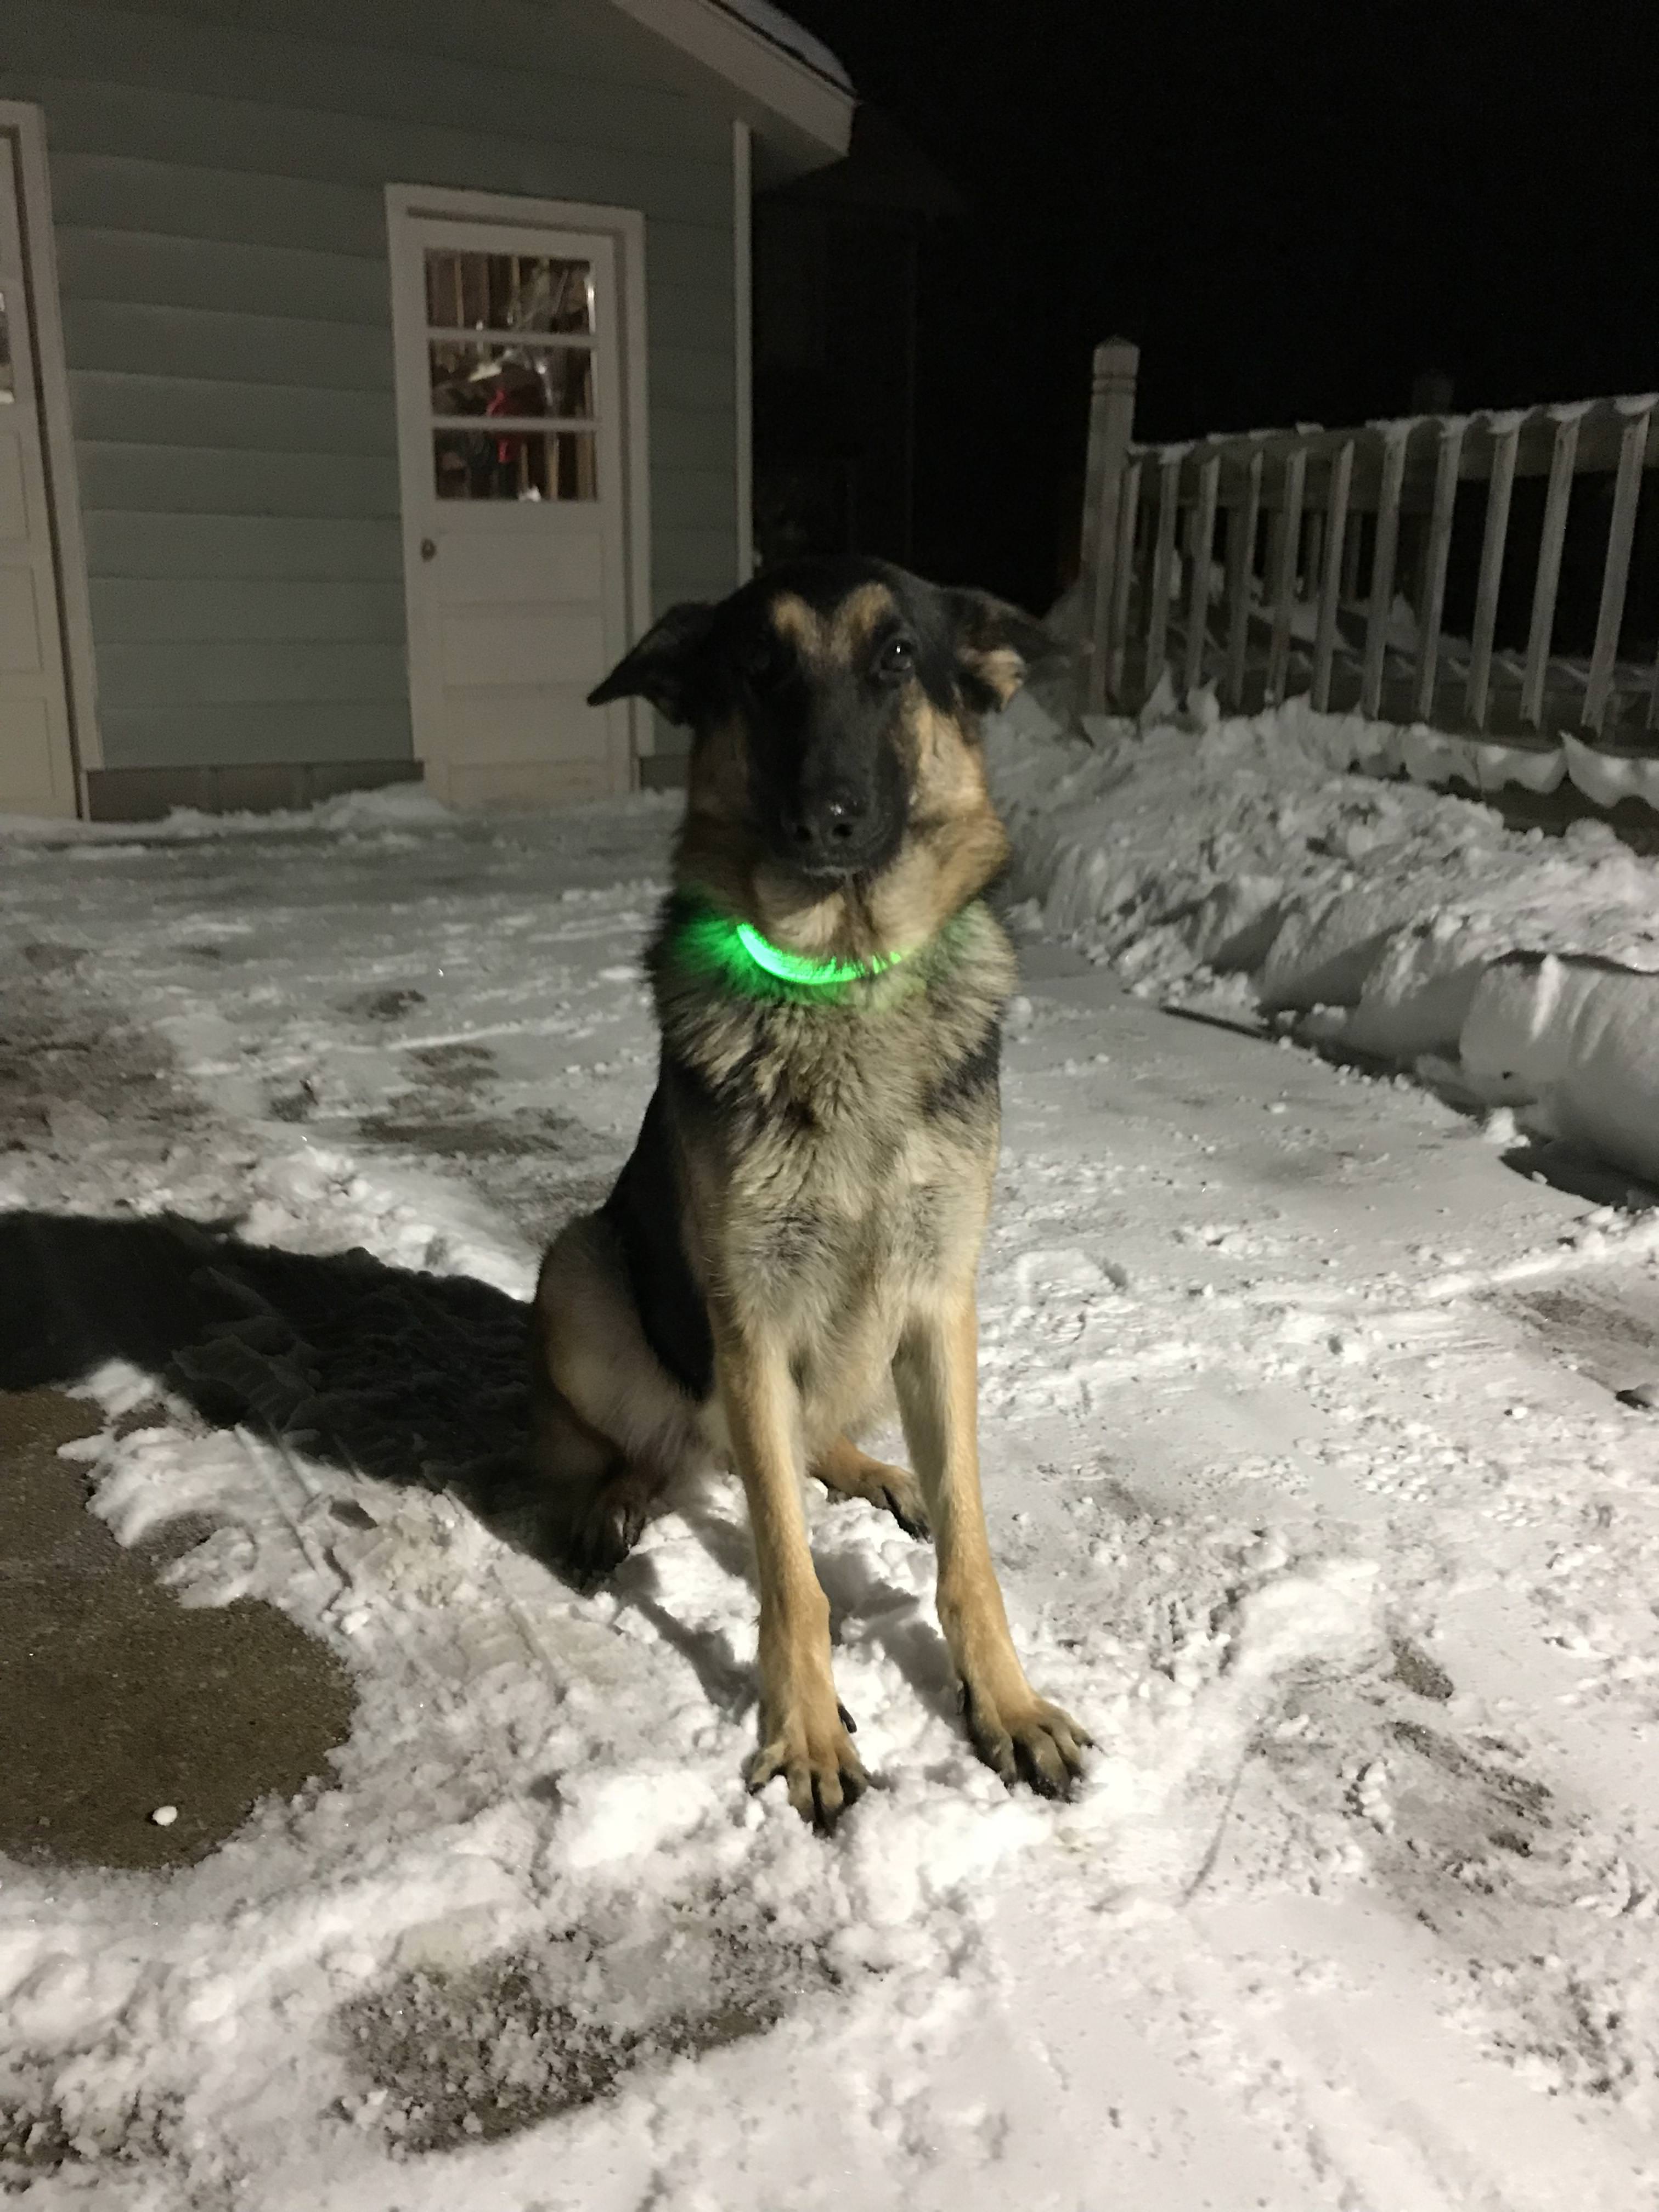 A guy posted this "secret_santa nailed it. She loves her collar and it makes our nightly walks so much cooler!"